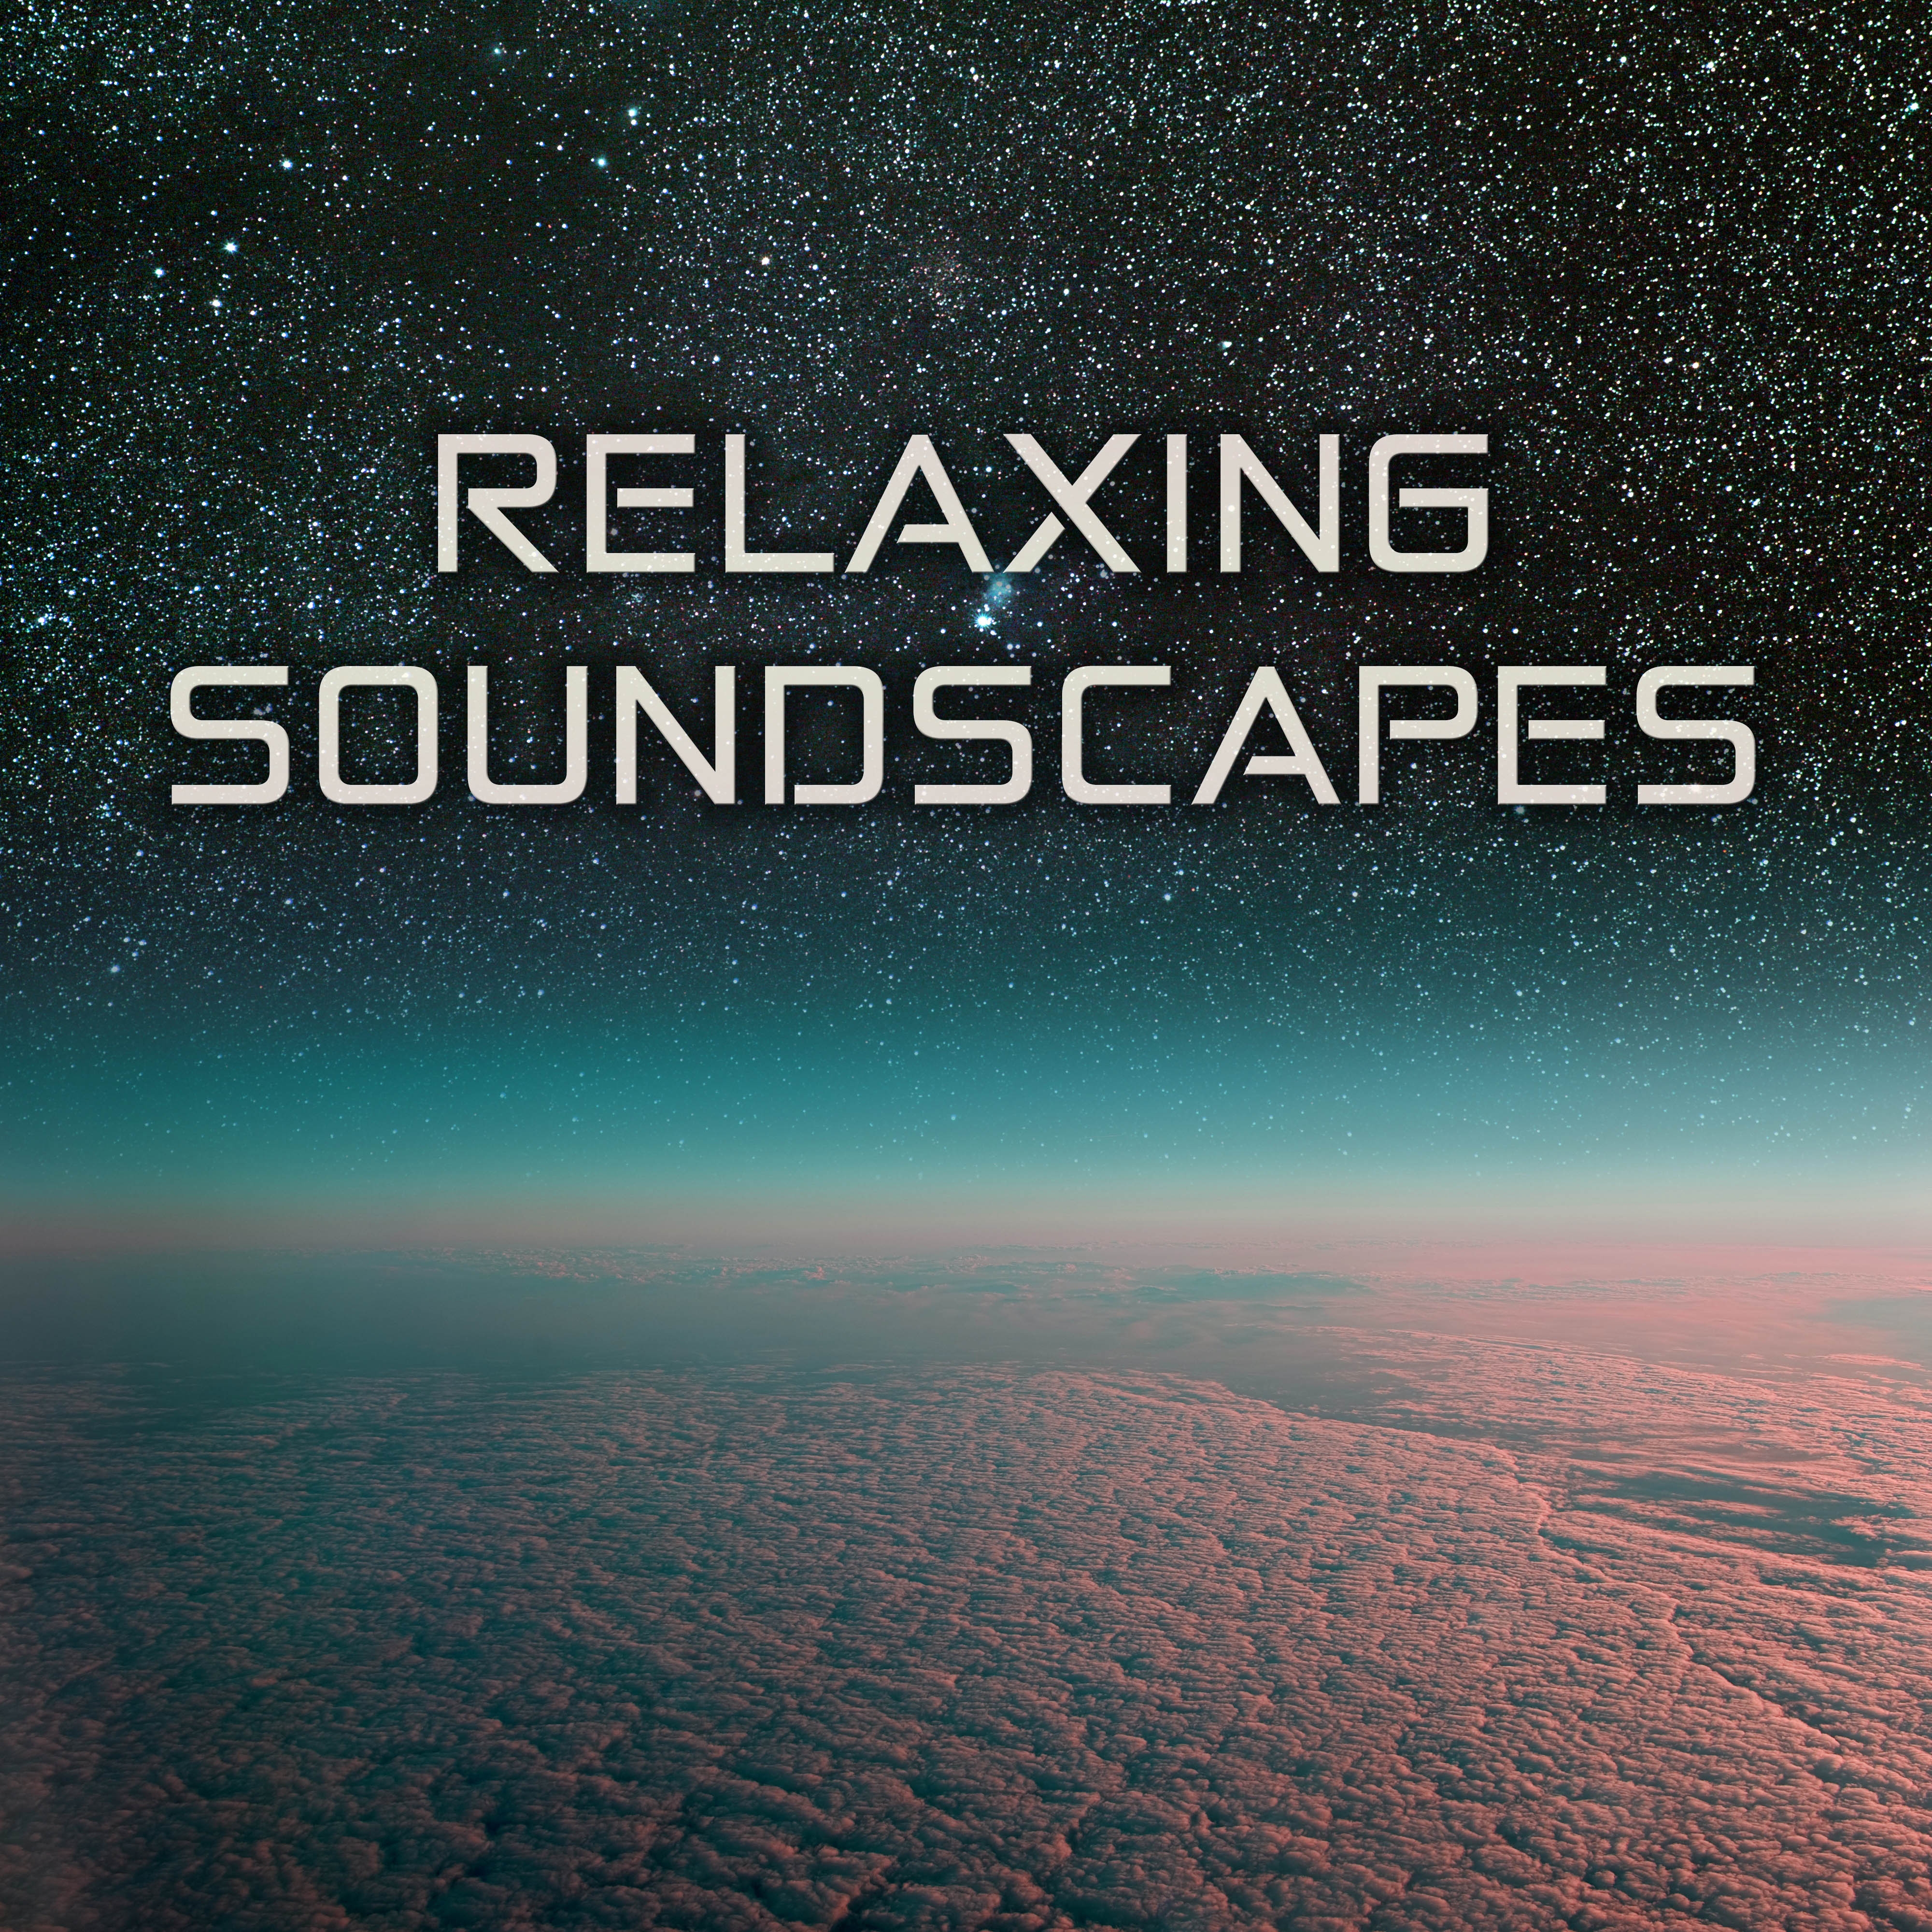 Relaxing Soundscapes and Healing Soothing Music for Guided Imagery and Mindfulness Exercises